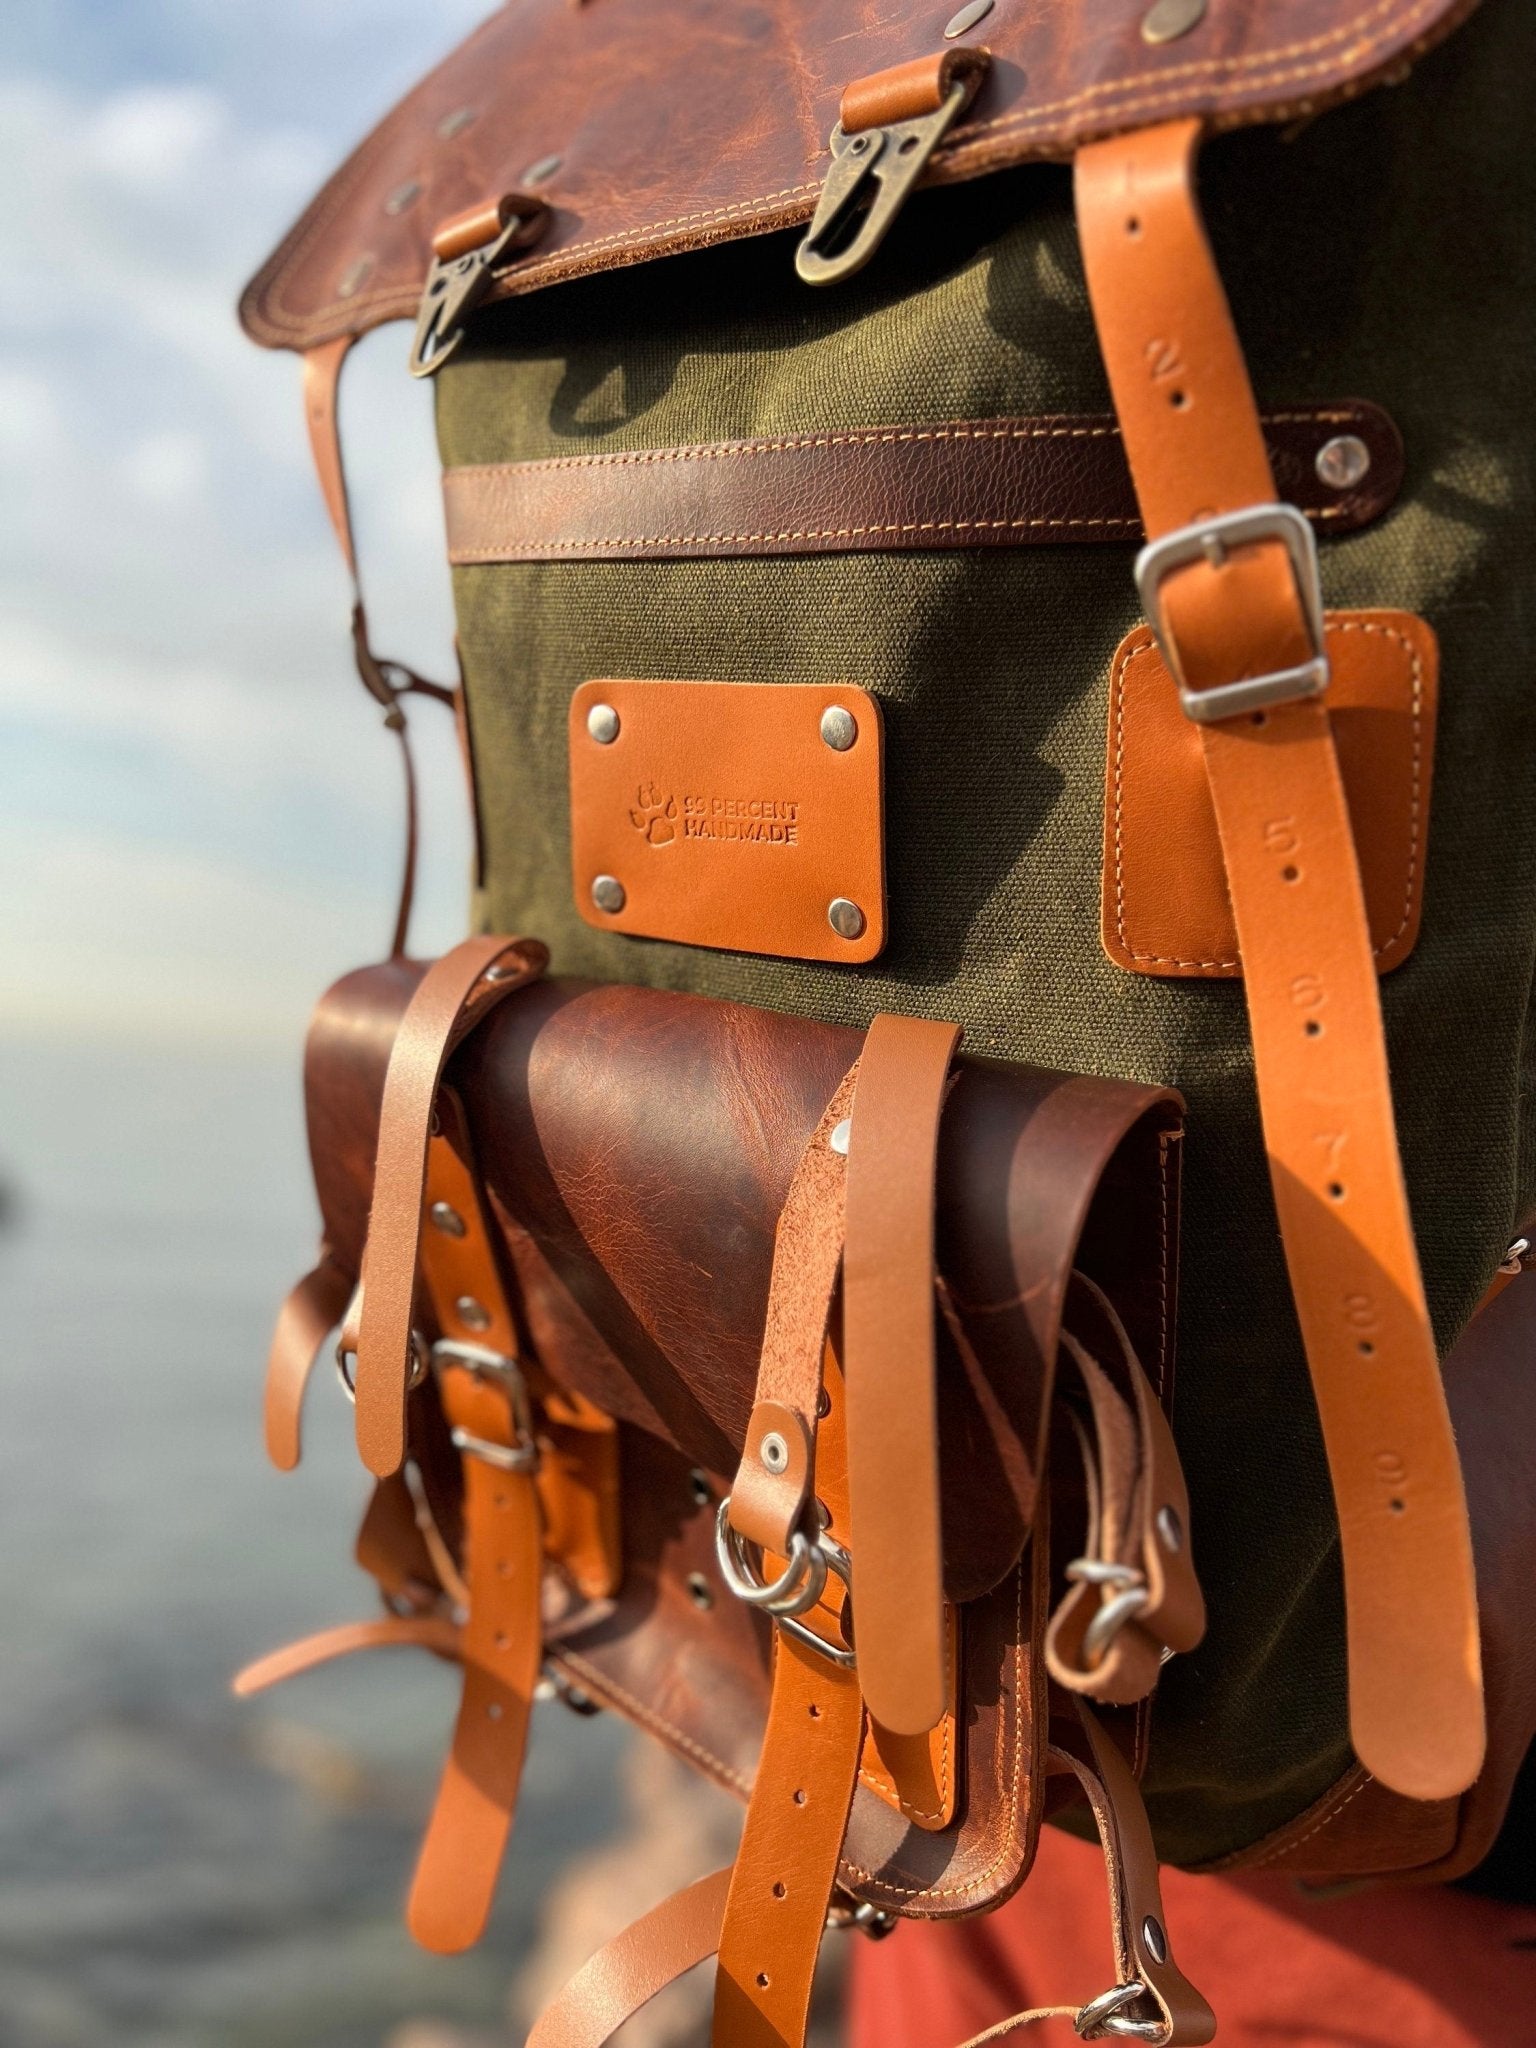 200USD Discount | Bushcraft Design Award | Handmade Leather and Canvas Backpack for Travel, Camping,Military | 45 Liter | Personalization  99percenthandmade   